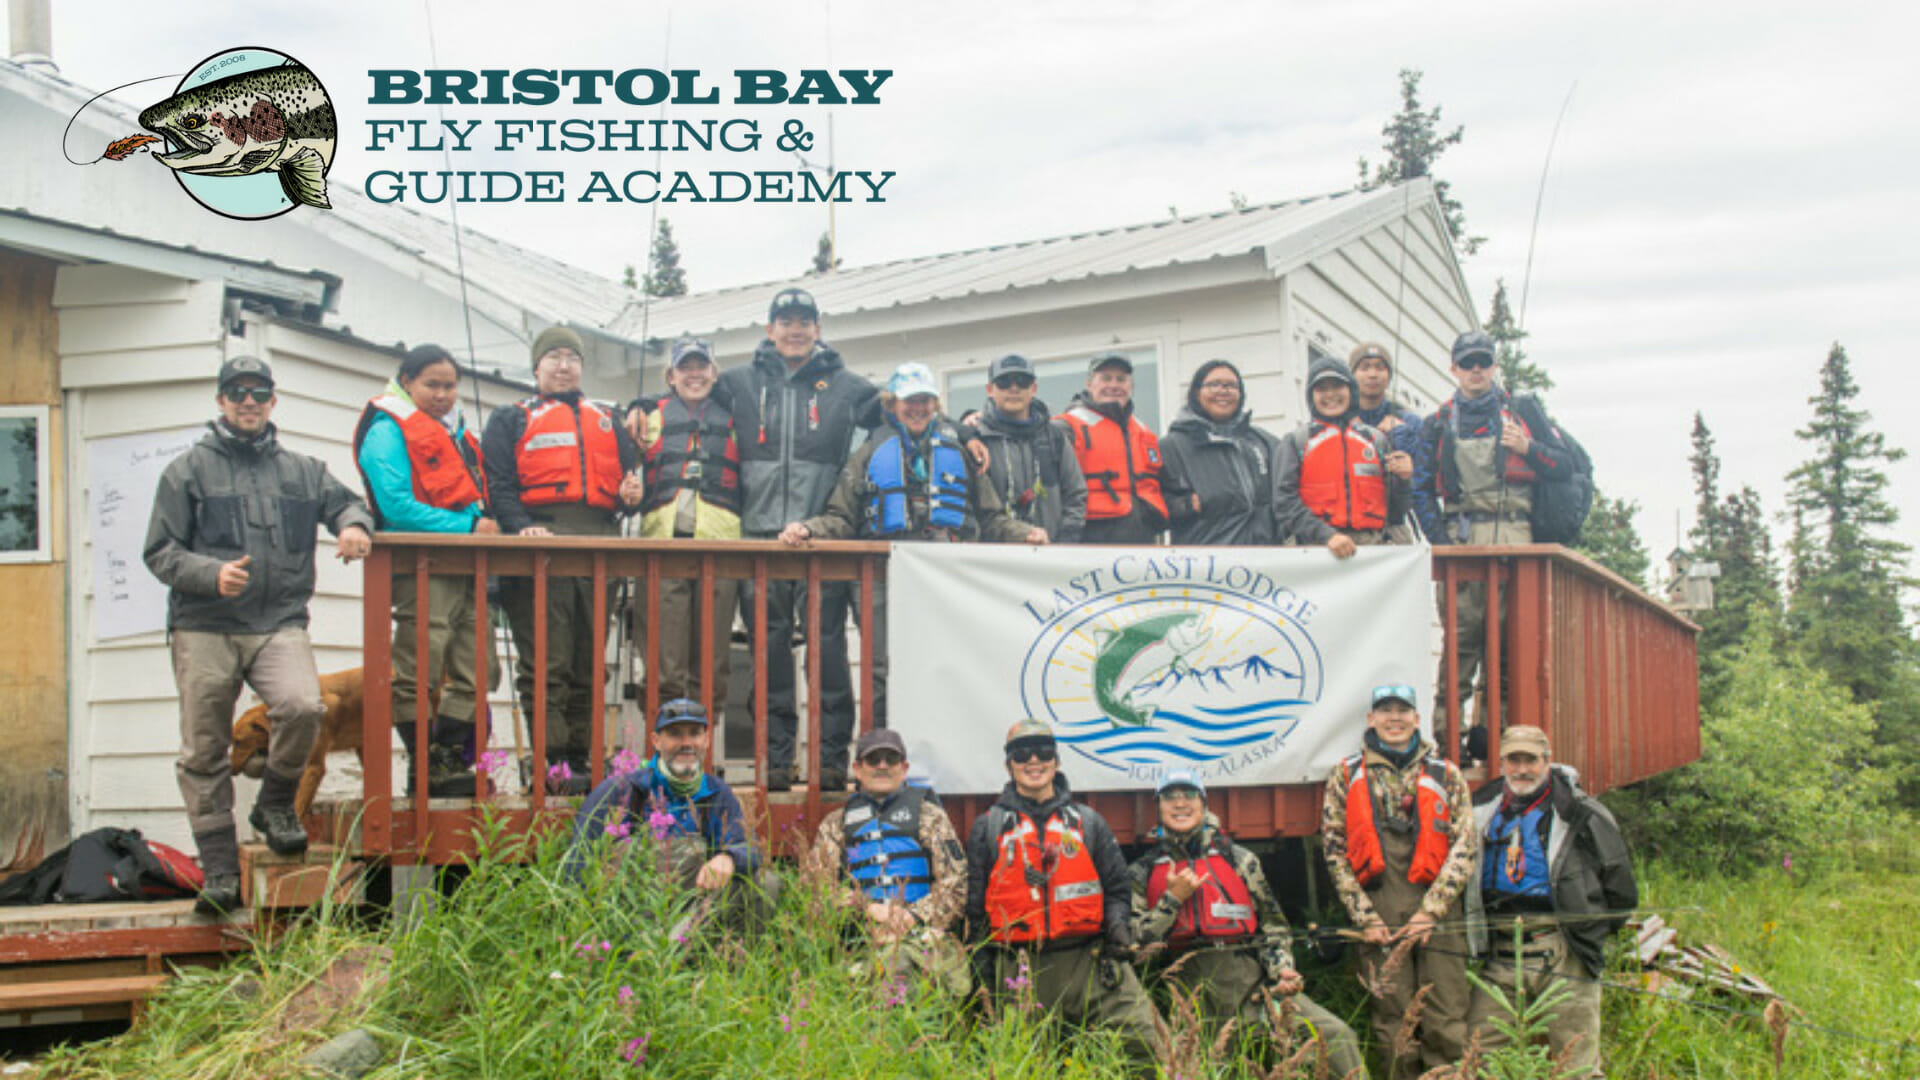 The Bristol Bay Fly Fishing & Guide Academy teaches Bristol Bay youth how  to pursue sportfishing jobs in their own community. The Academy